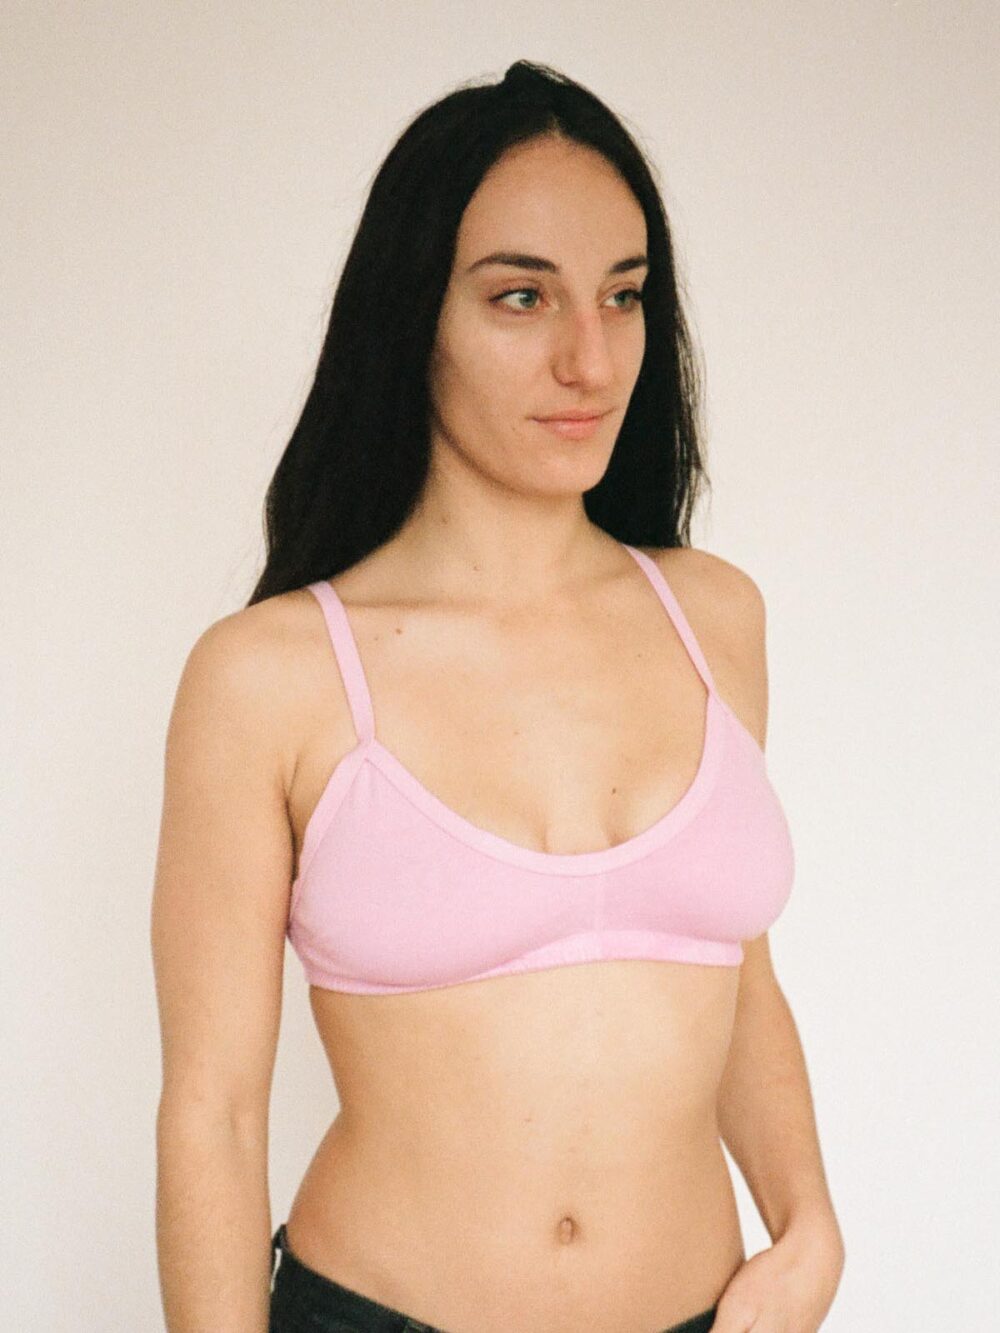 Smile Bra in Sherbet by Pansy front view on girl